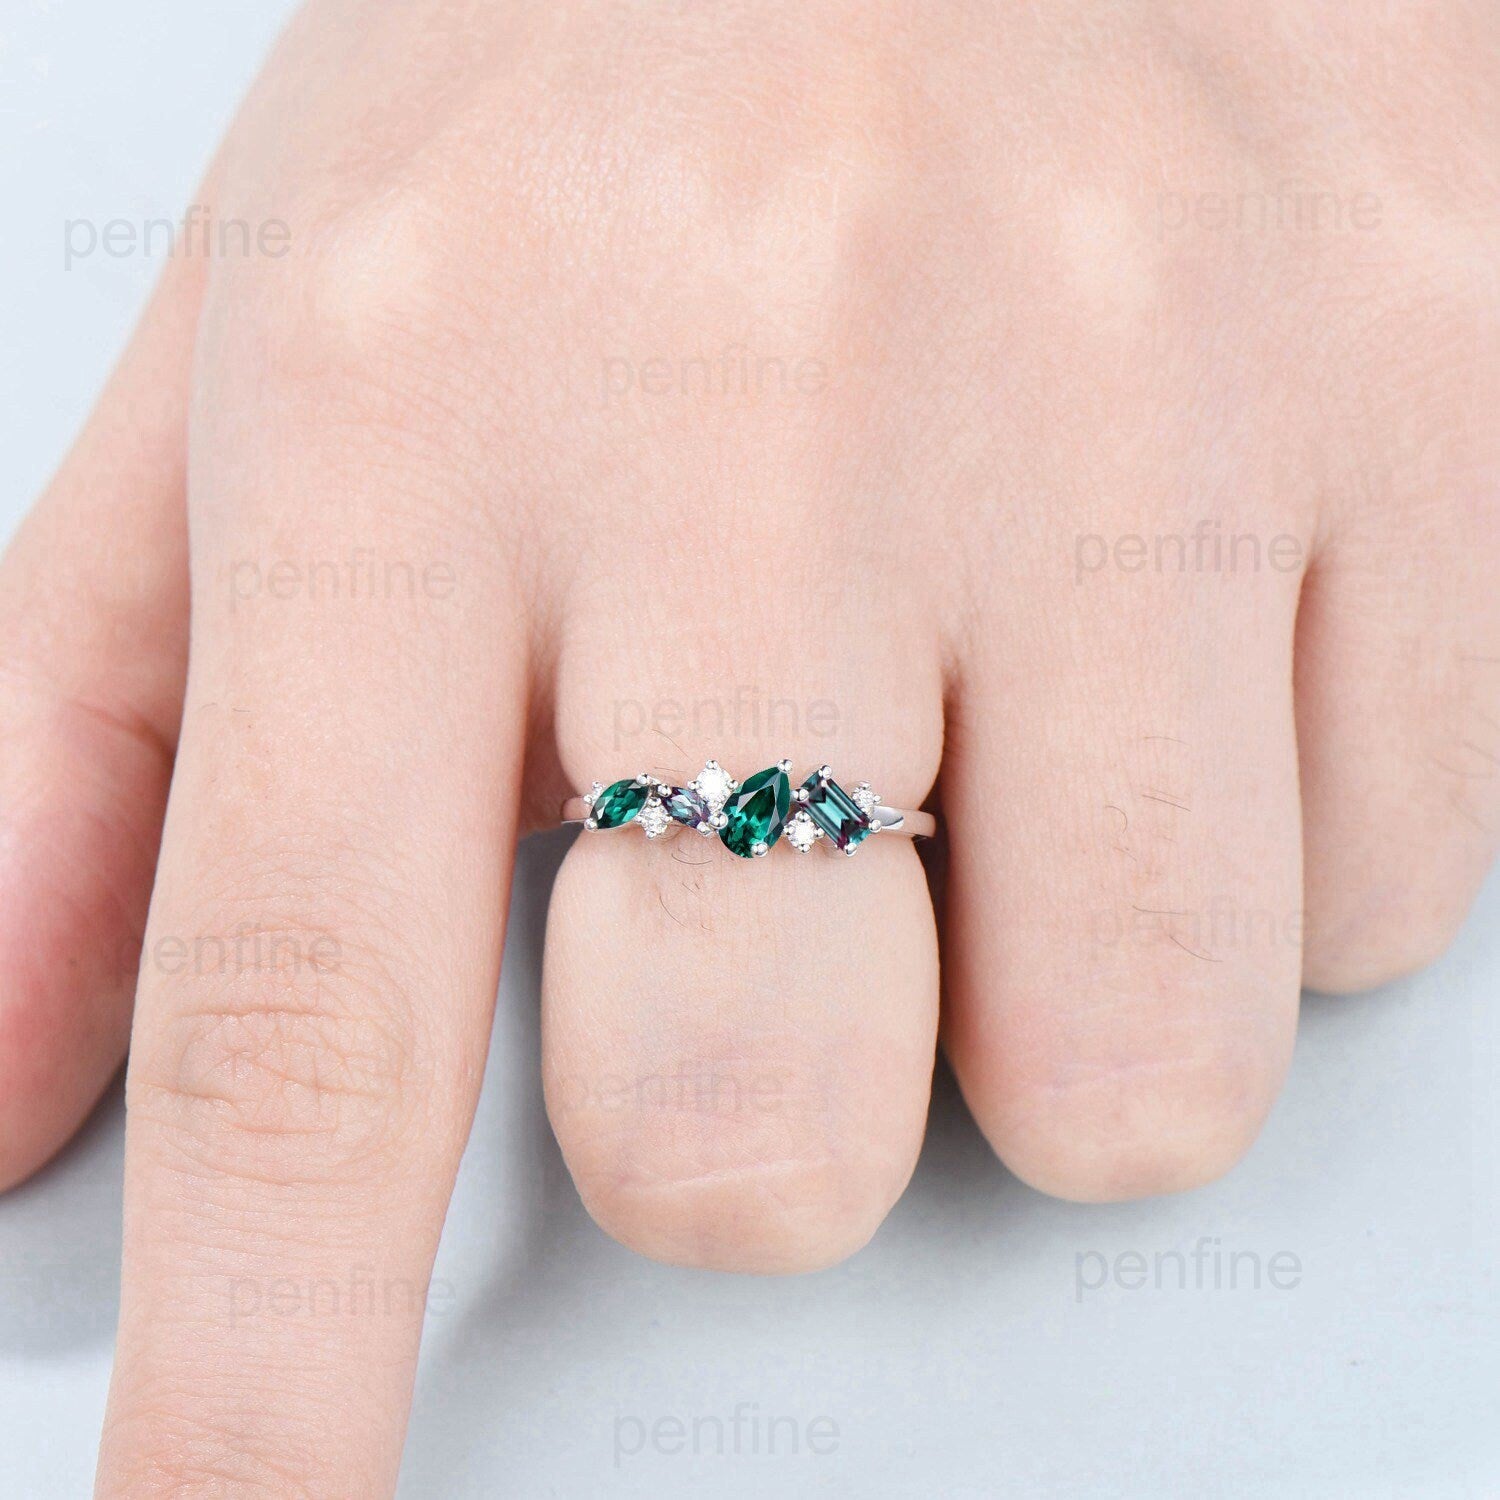 Vintage Baguette alexandrite wedding Band Pear emerald wedding ring for women Unique cluster moissanite Stacking matching Anniversary gift - PENFINE